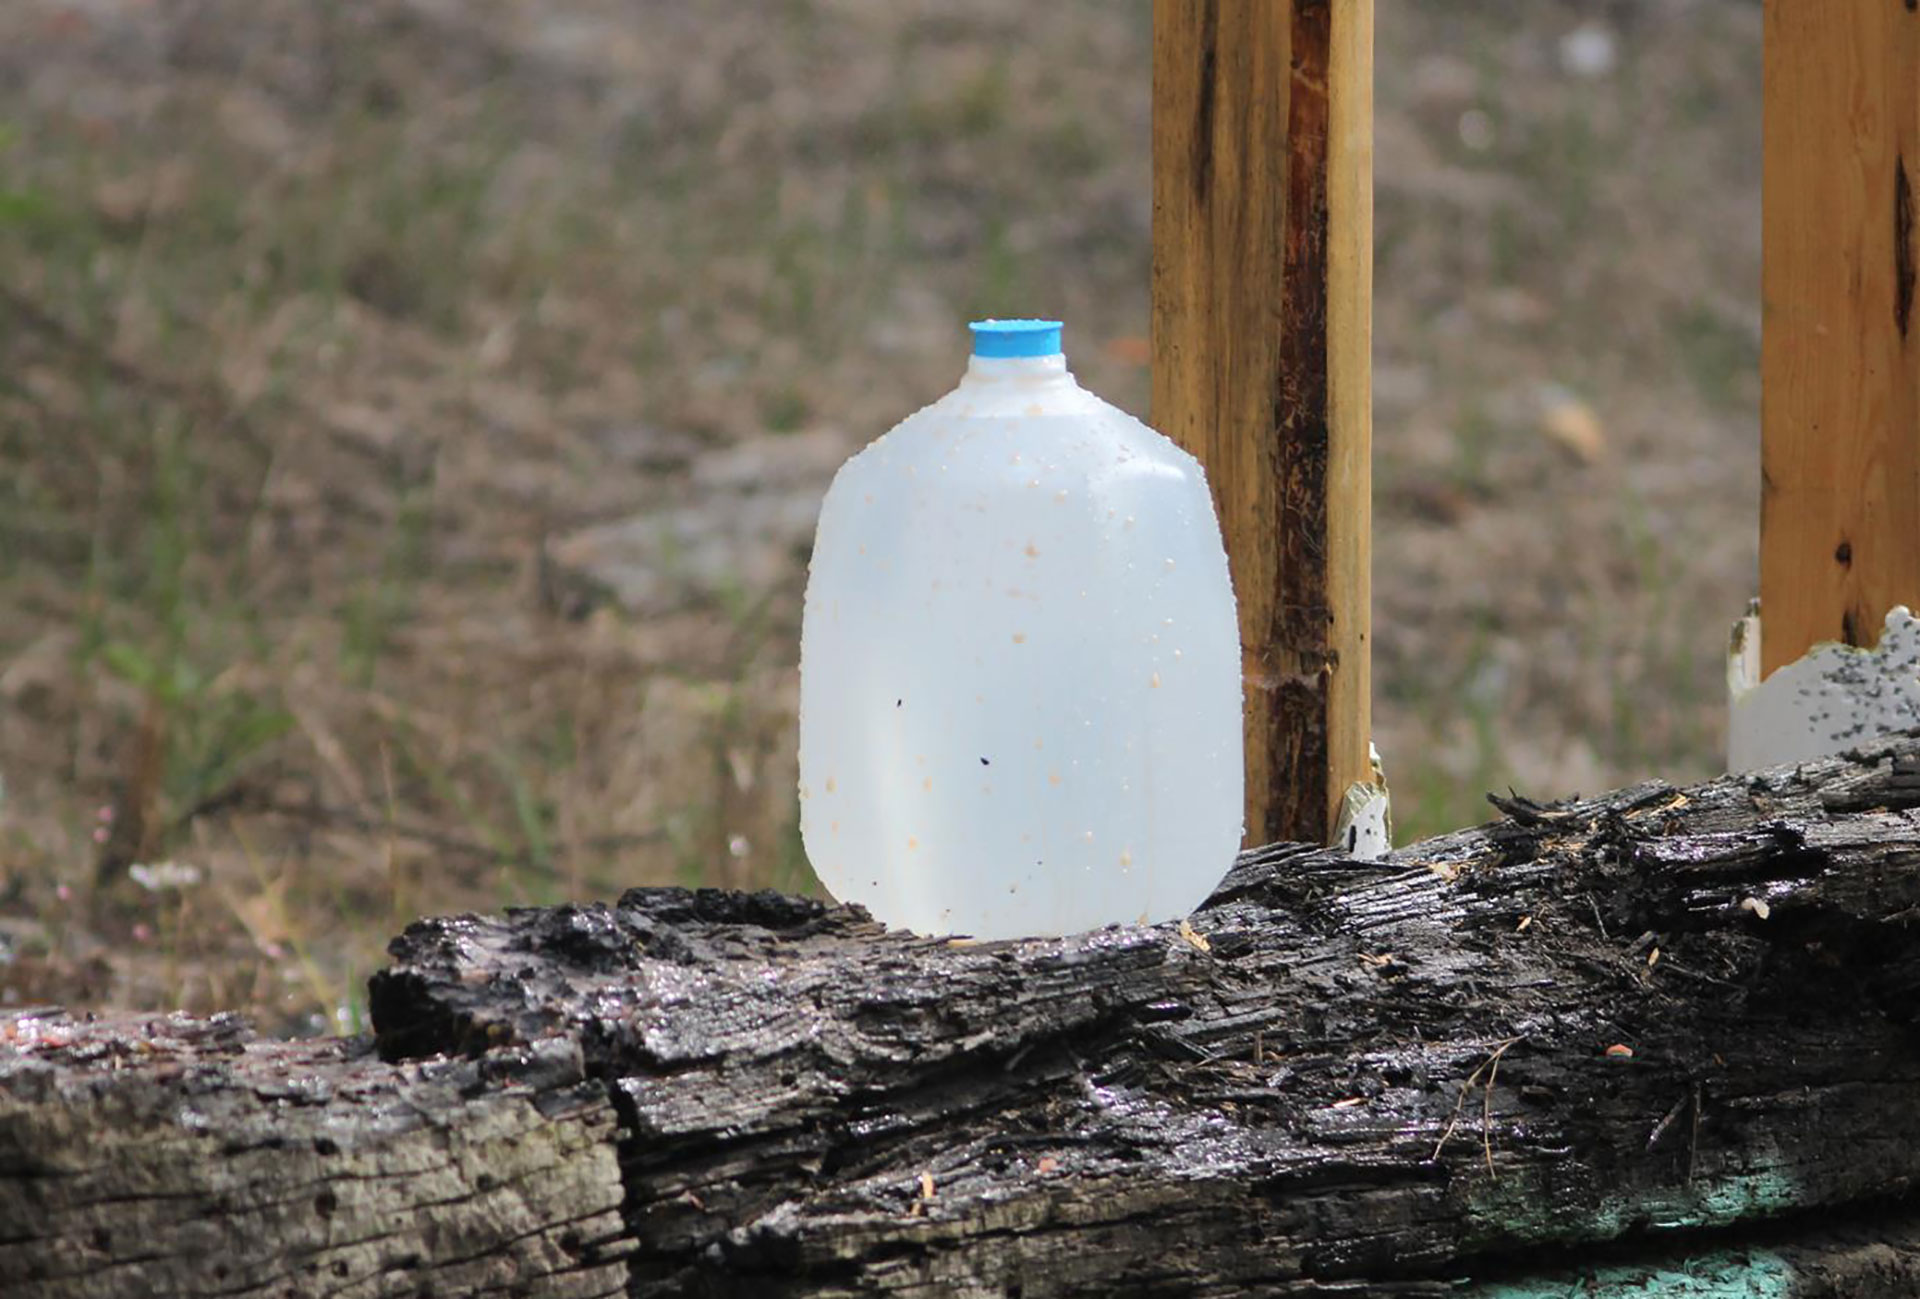 This lone water jug is about to have a close encounter with a solid, fluted .458 SOCOM bullet fired from a carbine at close range.